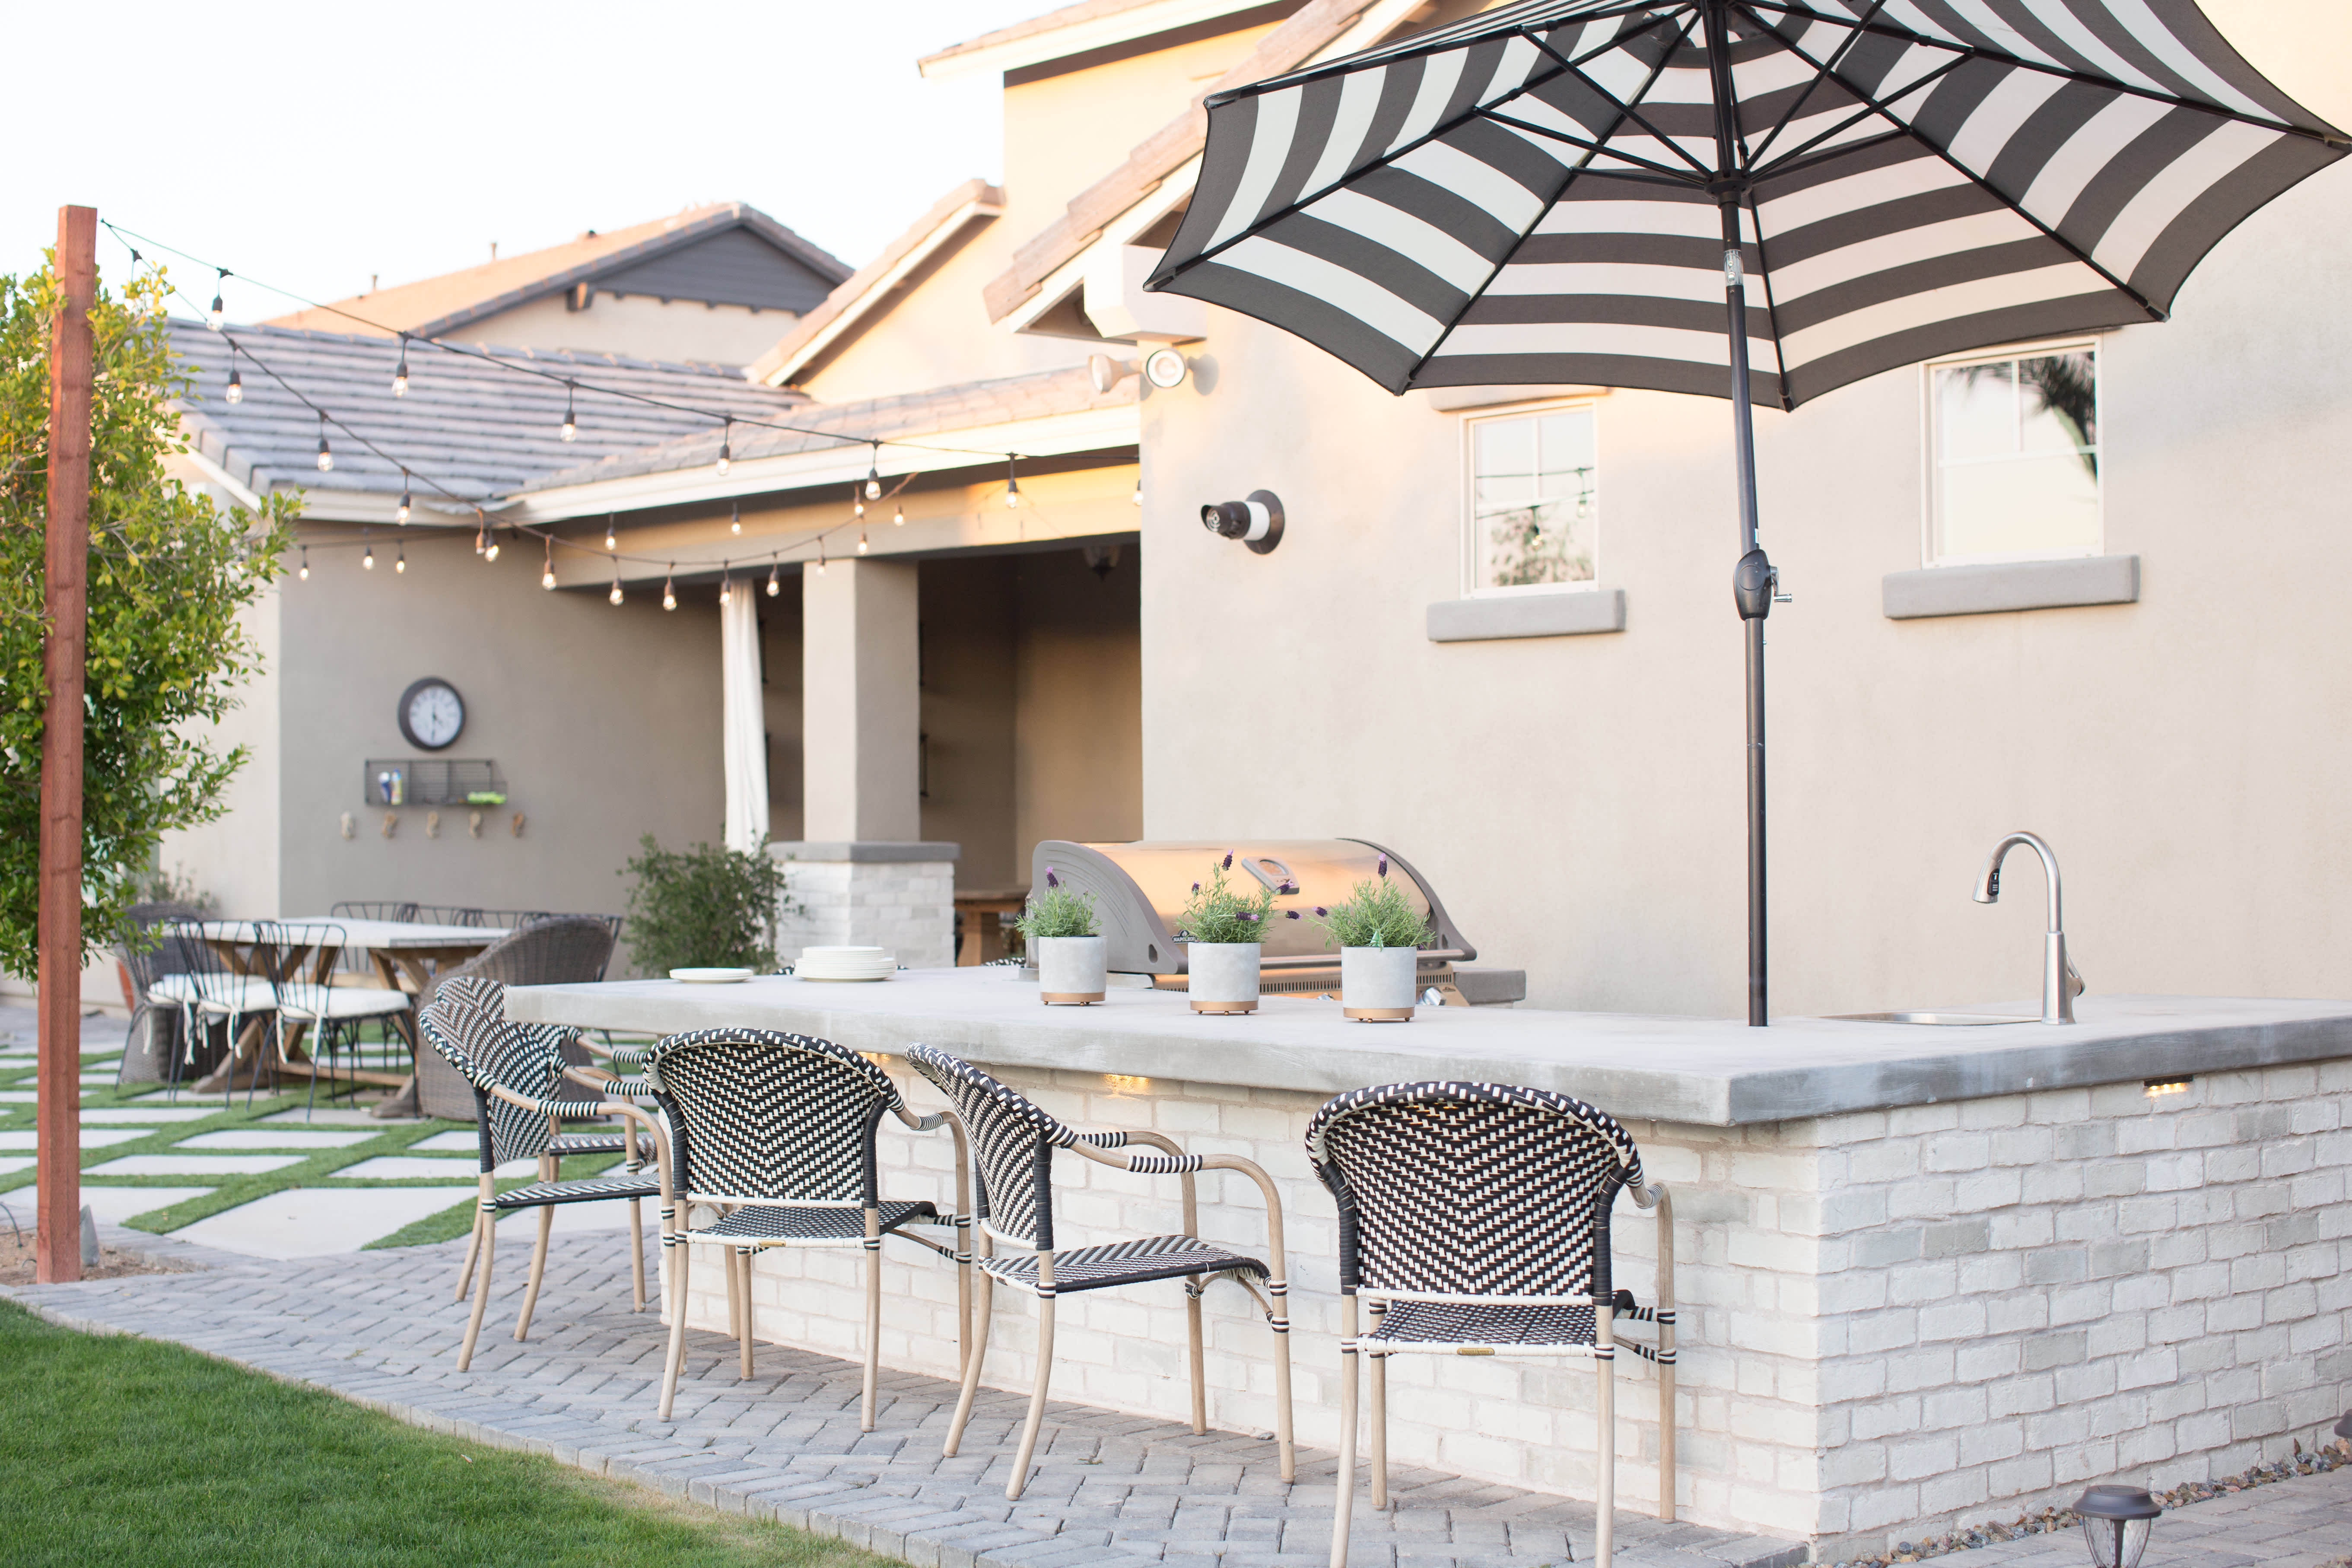 20 Outdoor Kitchen Ideas With Photos of Inspiring Spaces ...